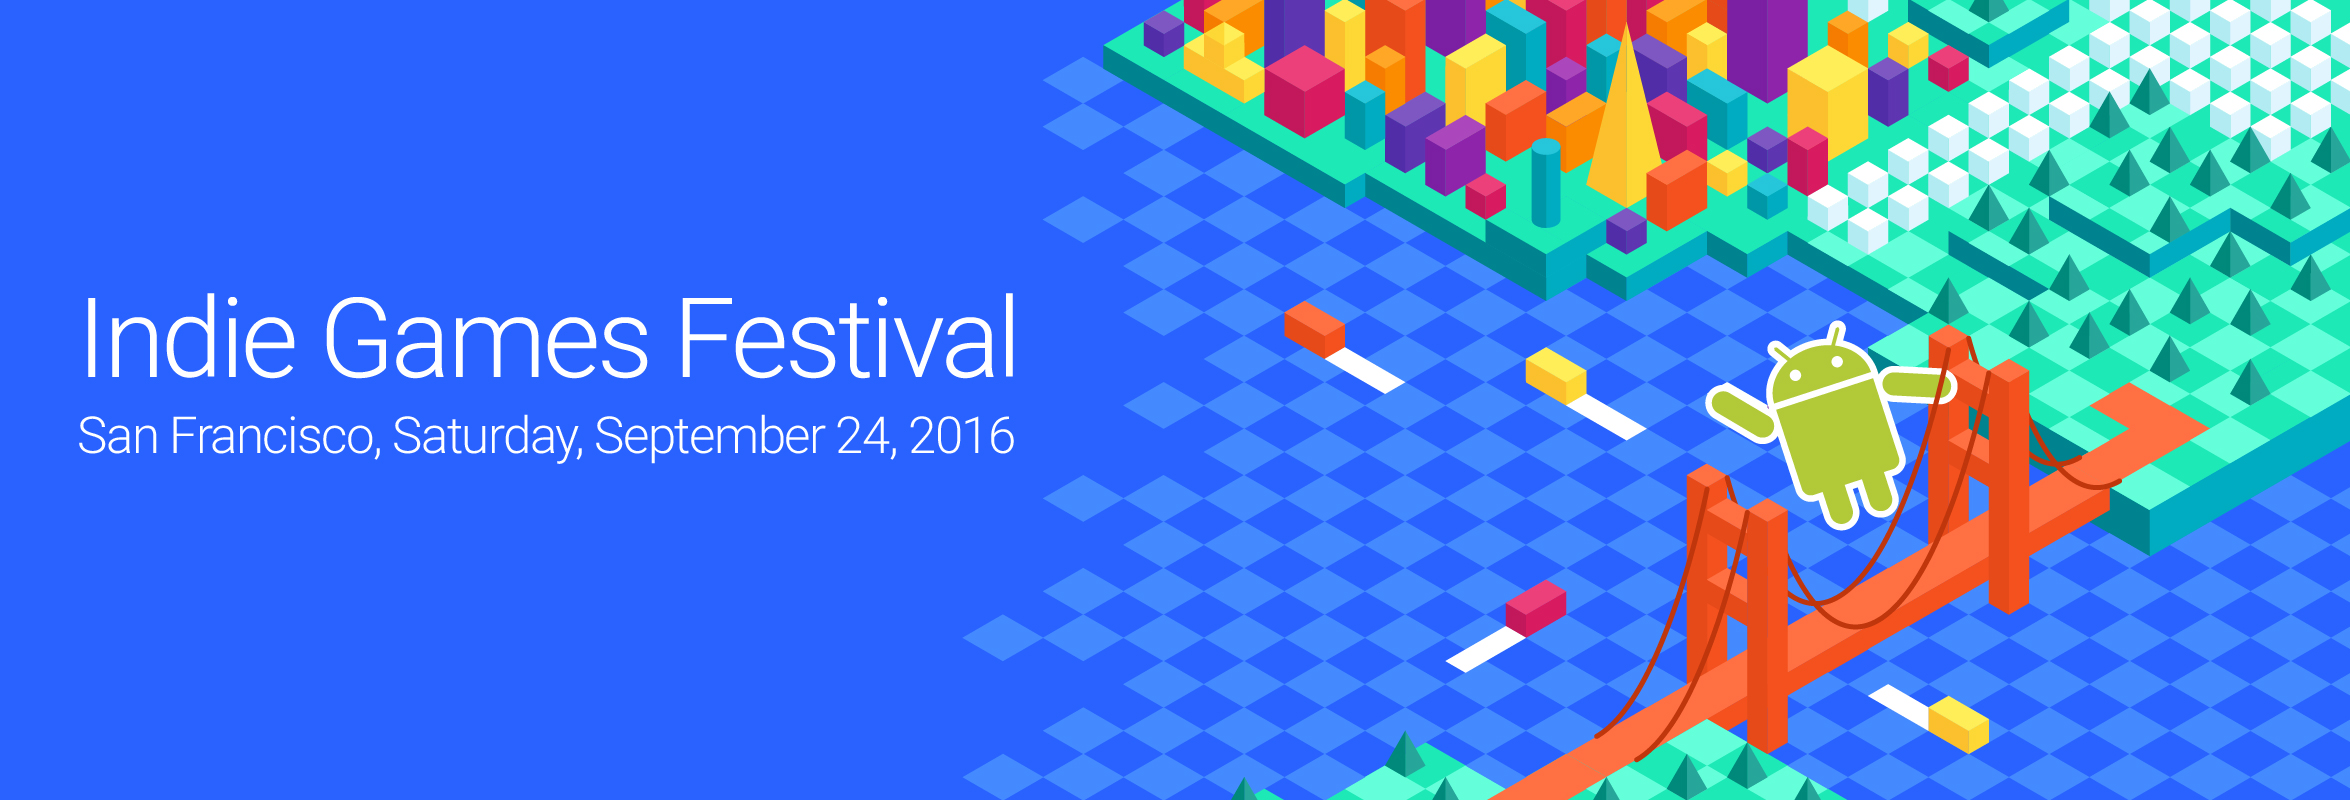 Google announces 30 games to be exhibited at Indie Games Festival on